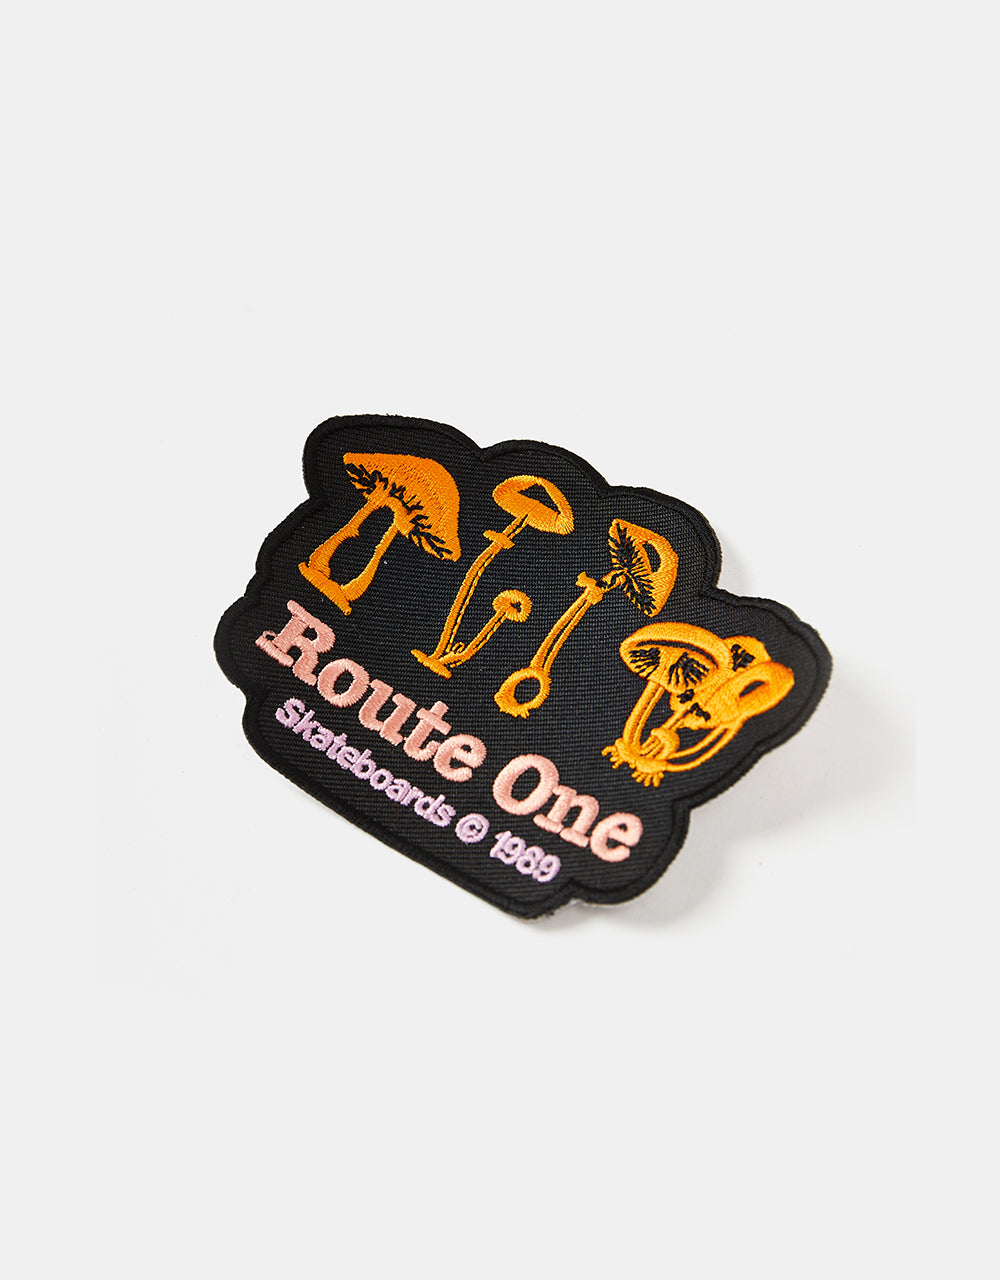 Route One Shrooms Embroidered Patch - Black